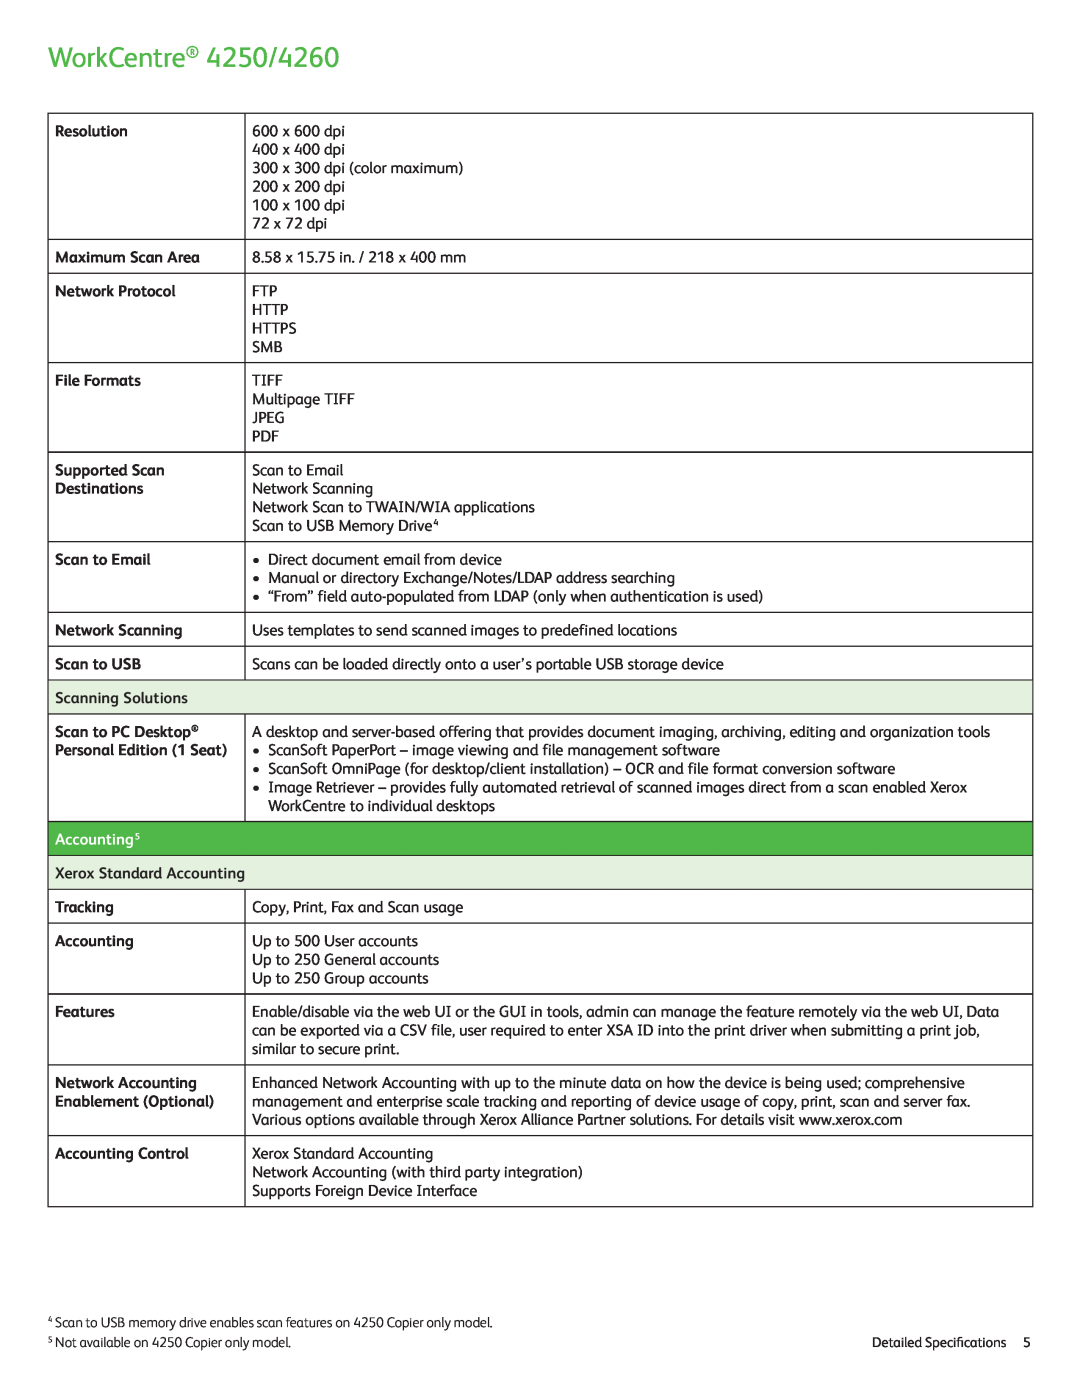 Xerox specifications Accounting5, WorkCentre 4250/4260, Resolution 